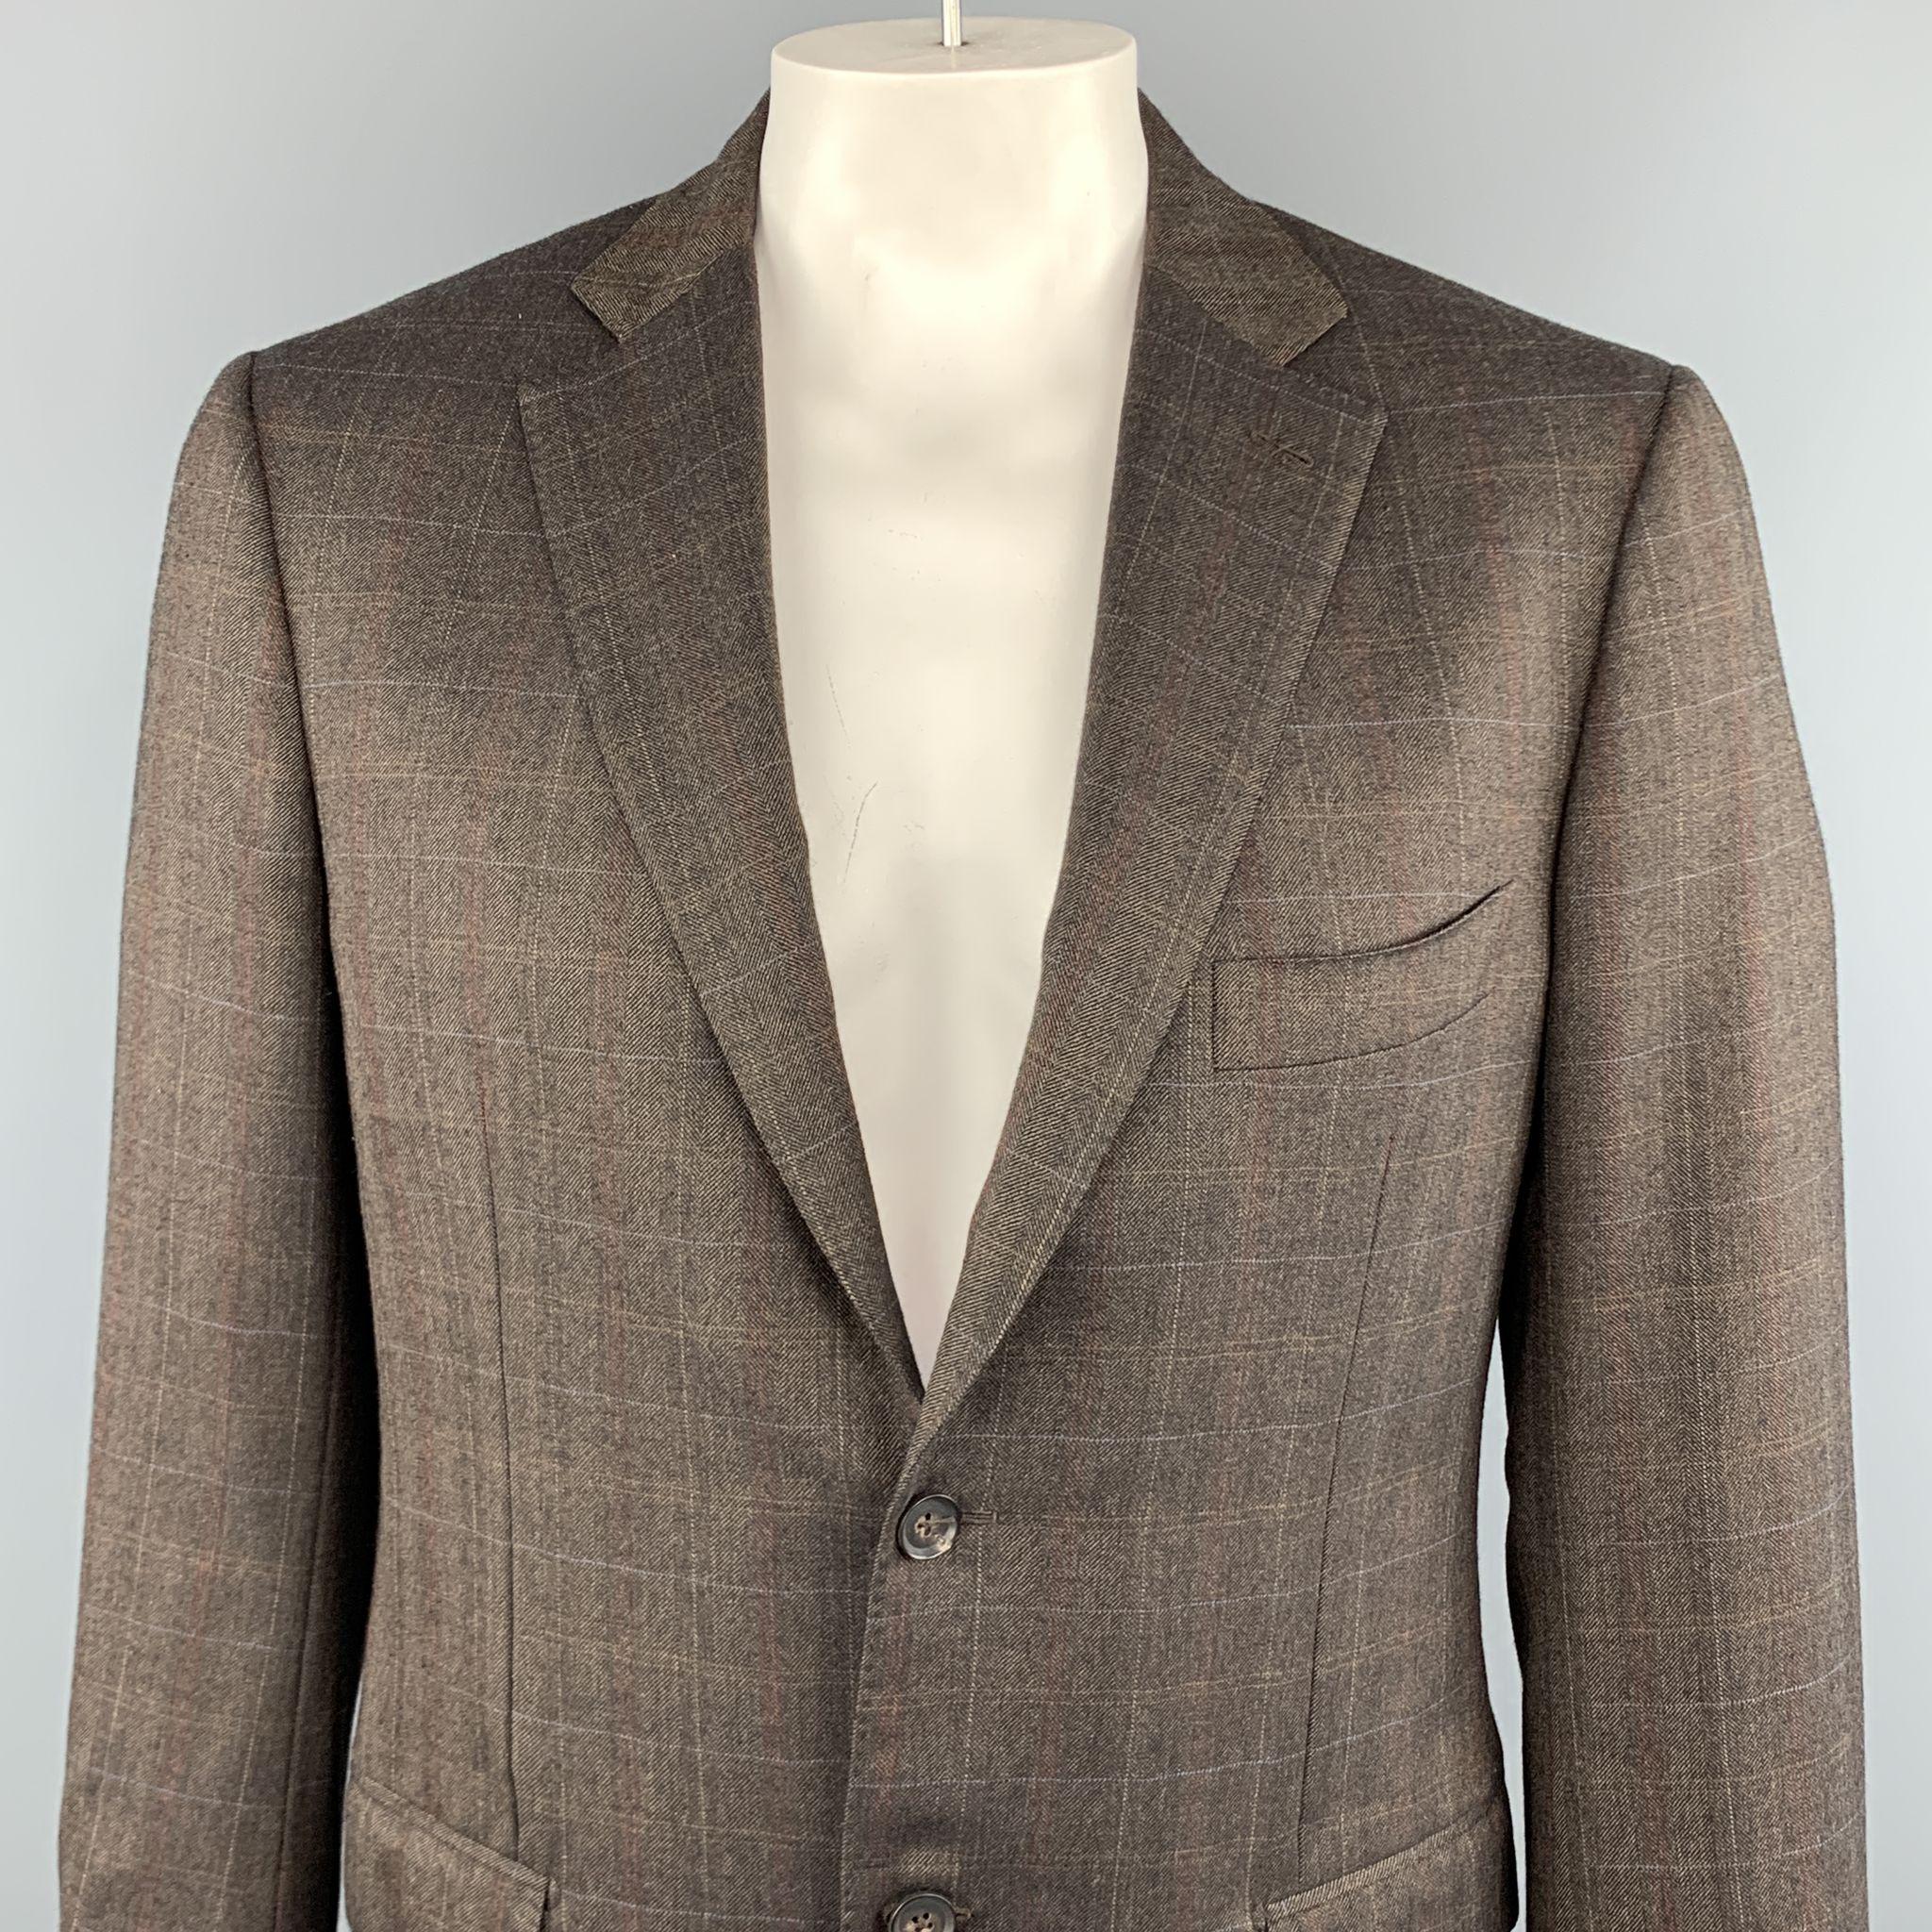 ISAIA sport coat comes in a brown plaid wool featuring a notch lapel style, two button closure, and flap pockets. Made in Italy.
 
Excellent Pre-Owned Condition.
Marked: 52
 
Measurements:
 
Shoulder: 18 in.
Chest: 40 in.
Sleeve: 26.5 in.
Length: 29